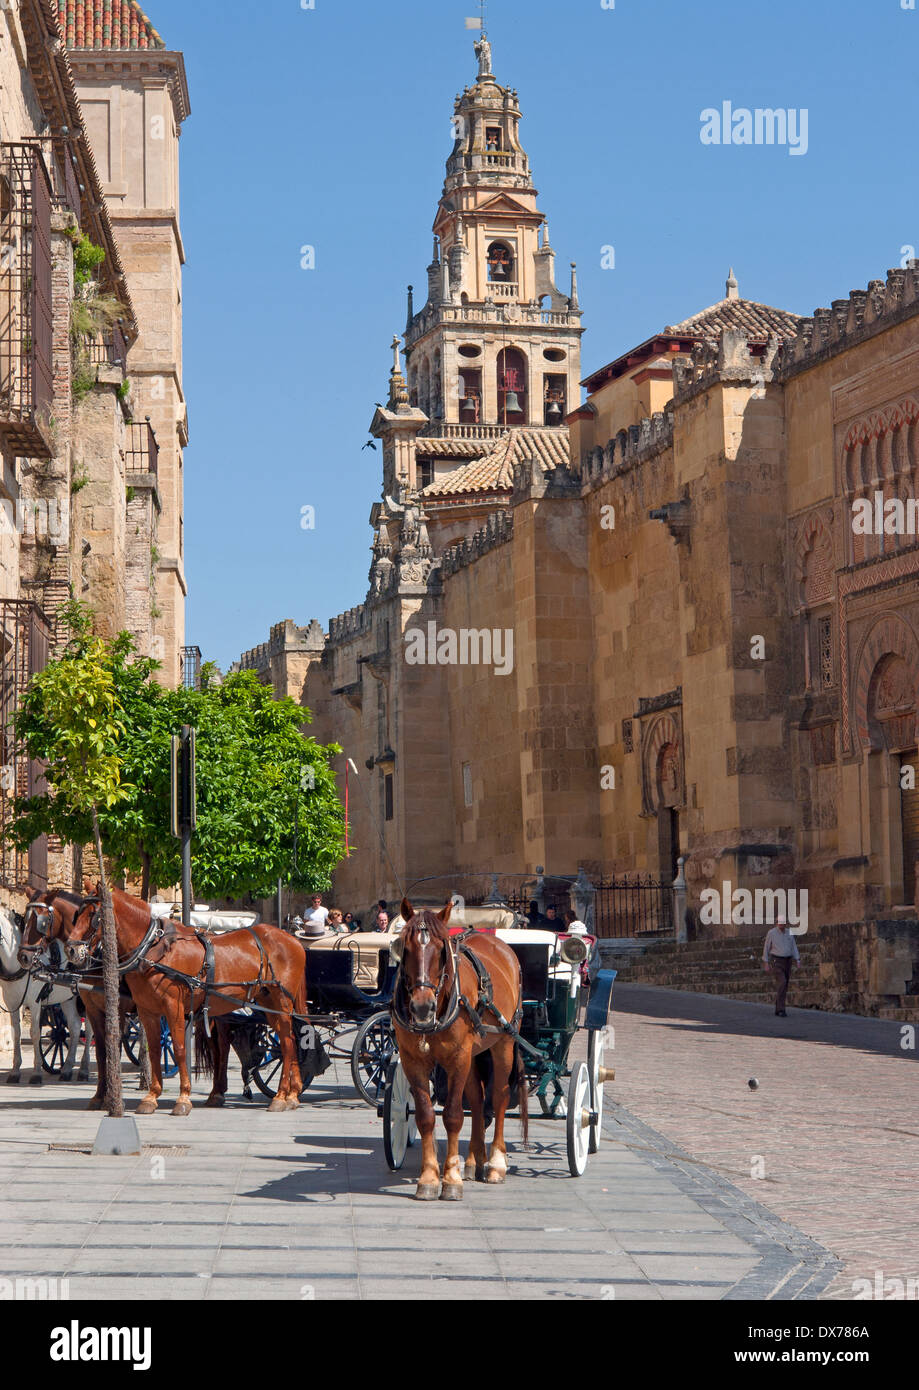 Cordoba, Andalucia,Spain. Tourist horse drawn carriage, with the Torre del Alminar (bell tower) of the Cathedral in background. Stock Photo